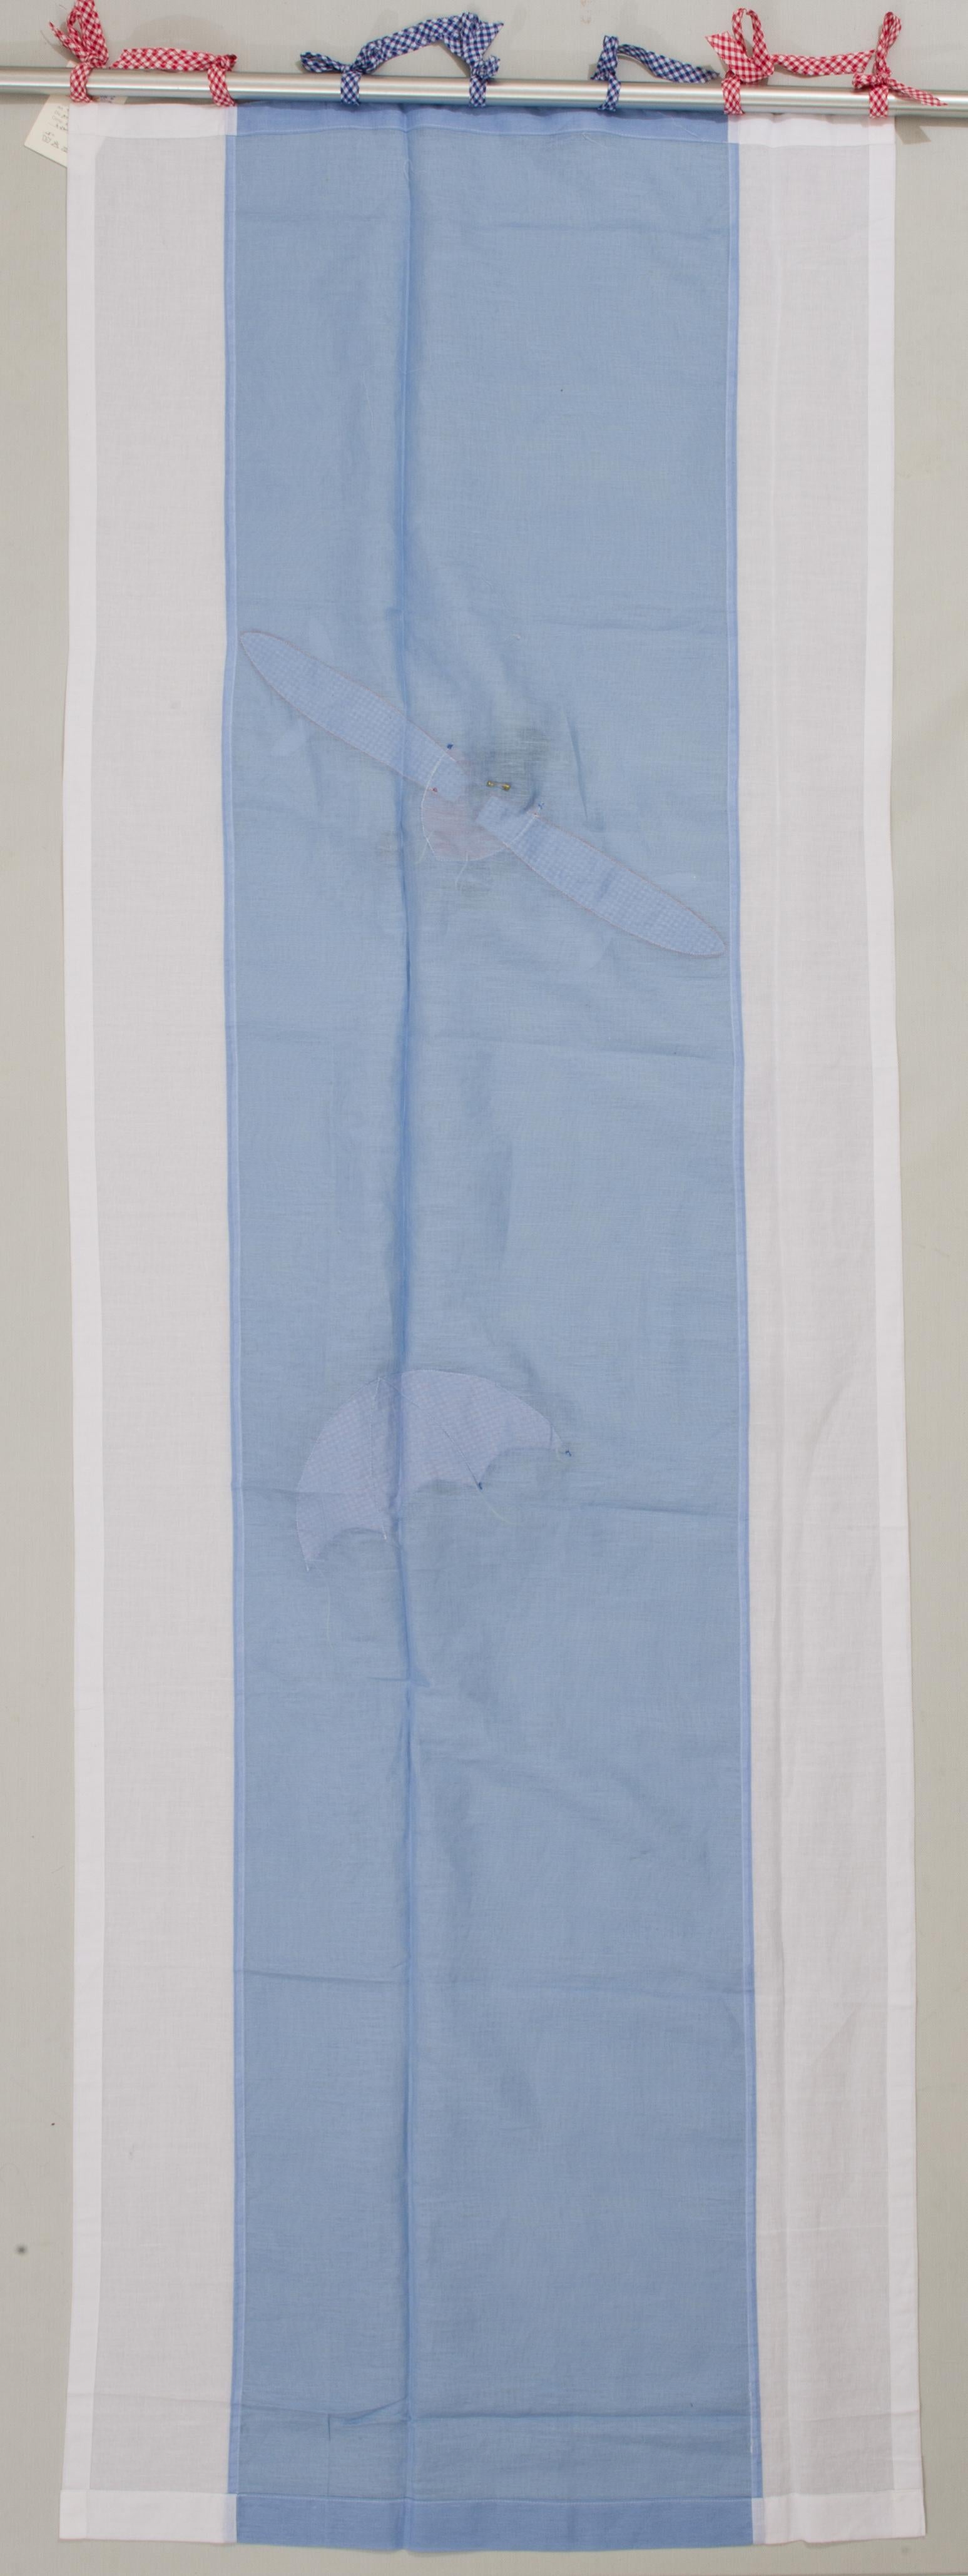 Original curtain for the children's room: it can be completed with two side white curtains.
The bears are perfectly aviator's dressed and stopped on the curtain with a safety pin, to be removed during washing.
B/1844.